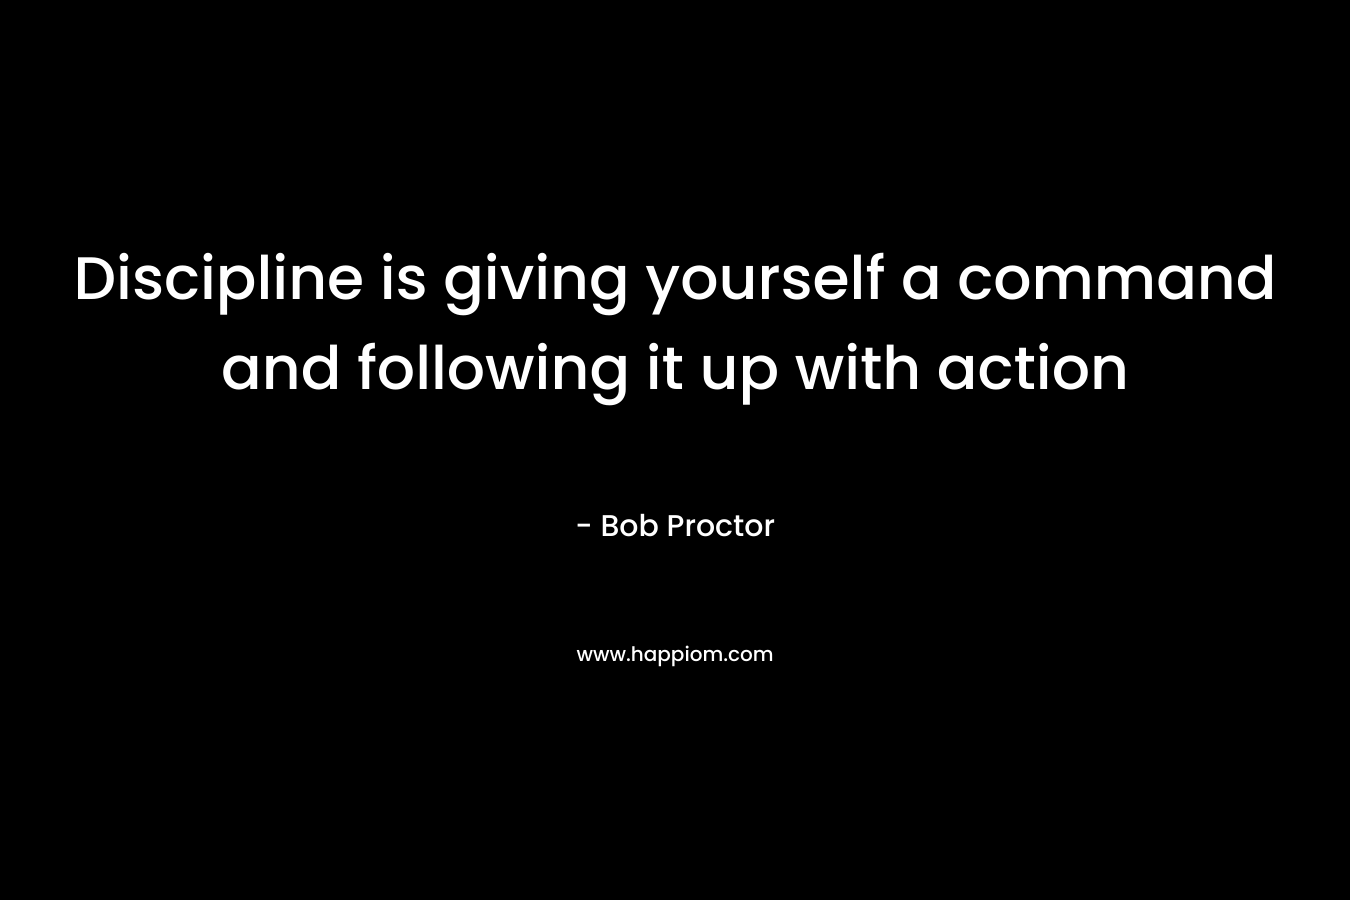 Discipline is giving yourself a command and following it up with action